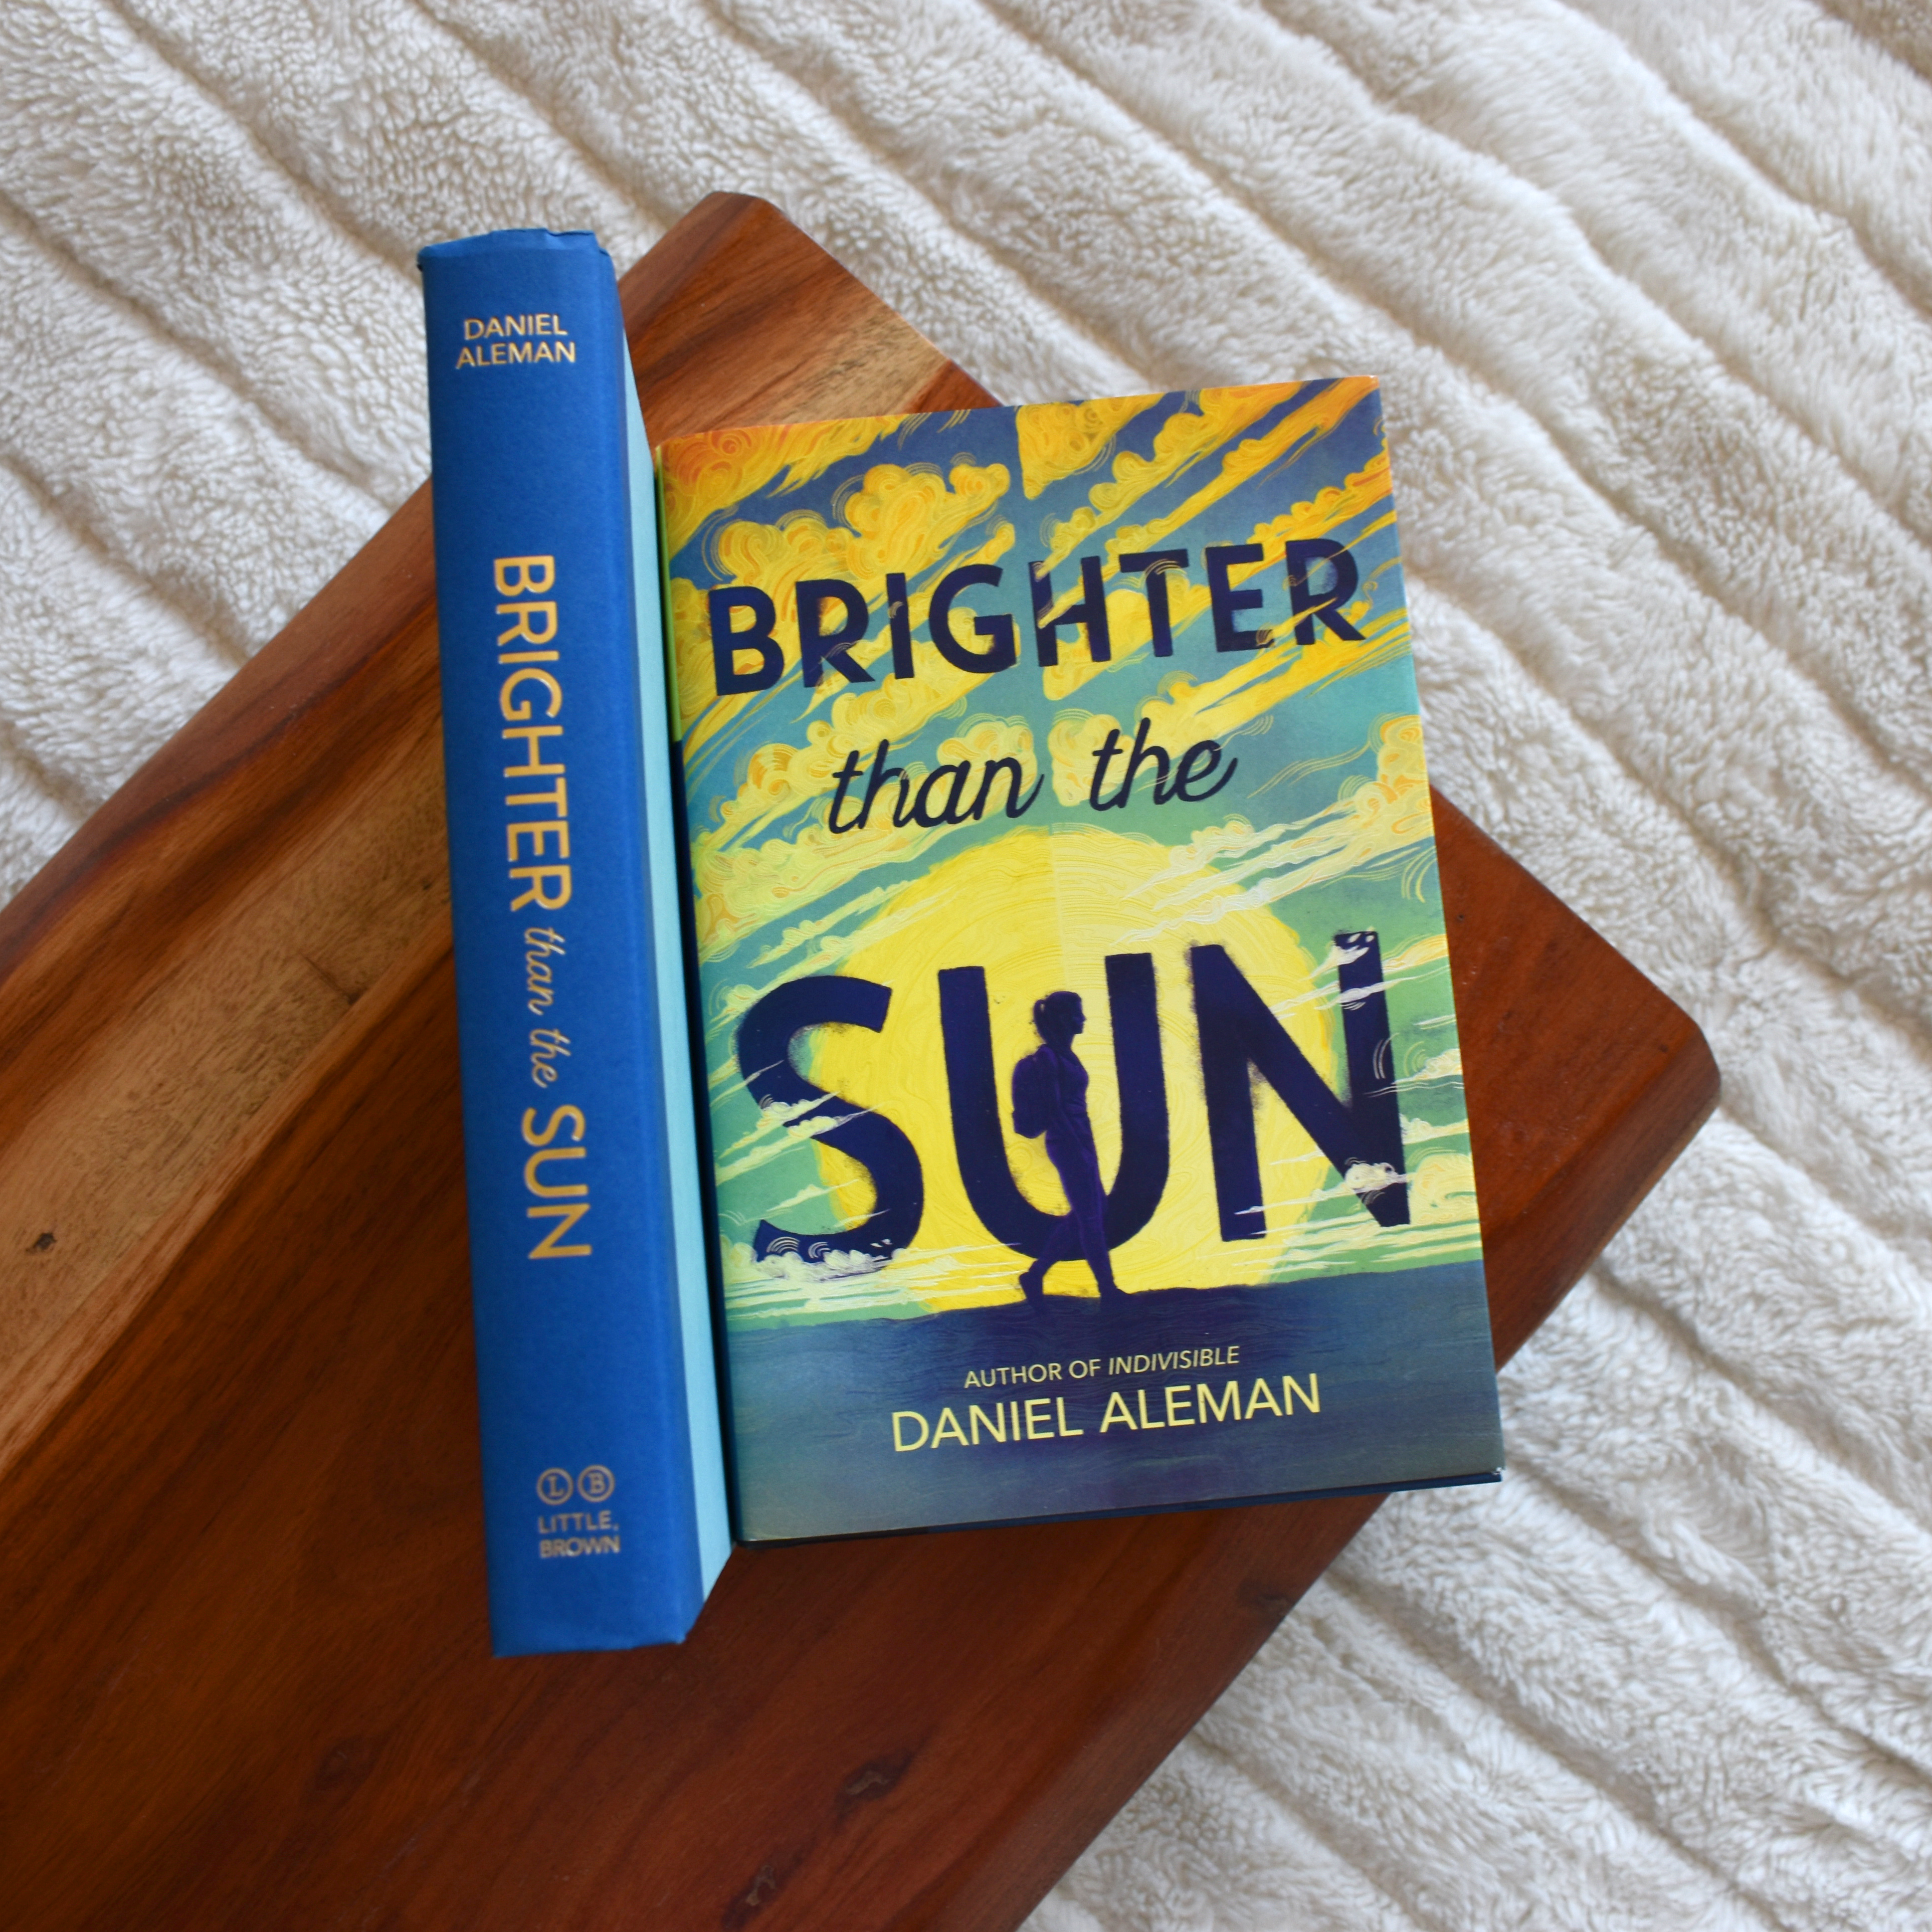 Instagram image of the book "Brighter than the Sun" by Daniel Aleman